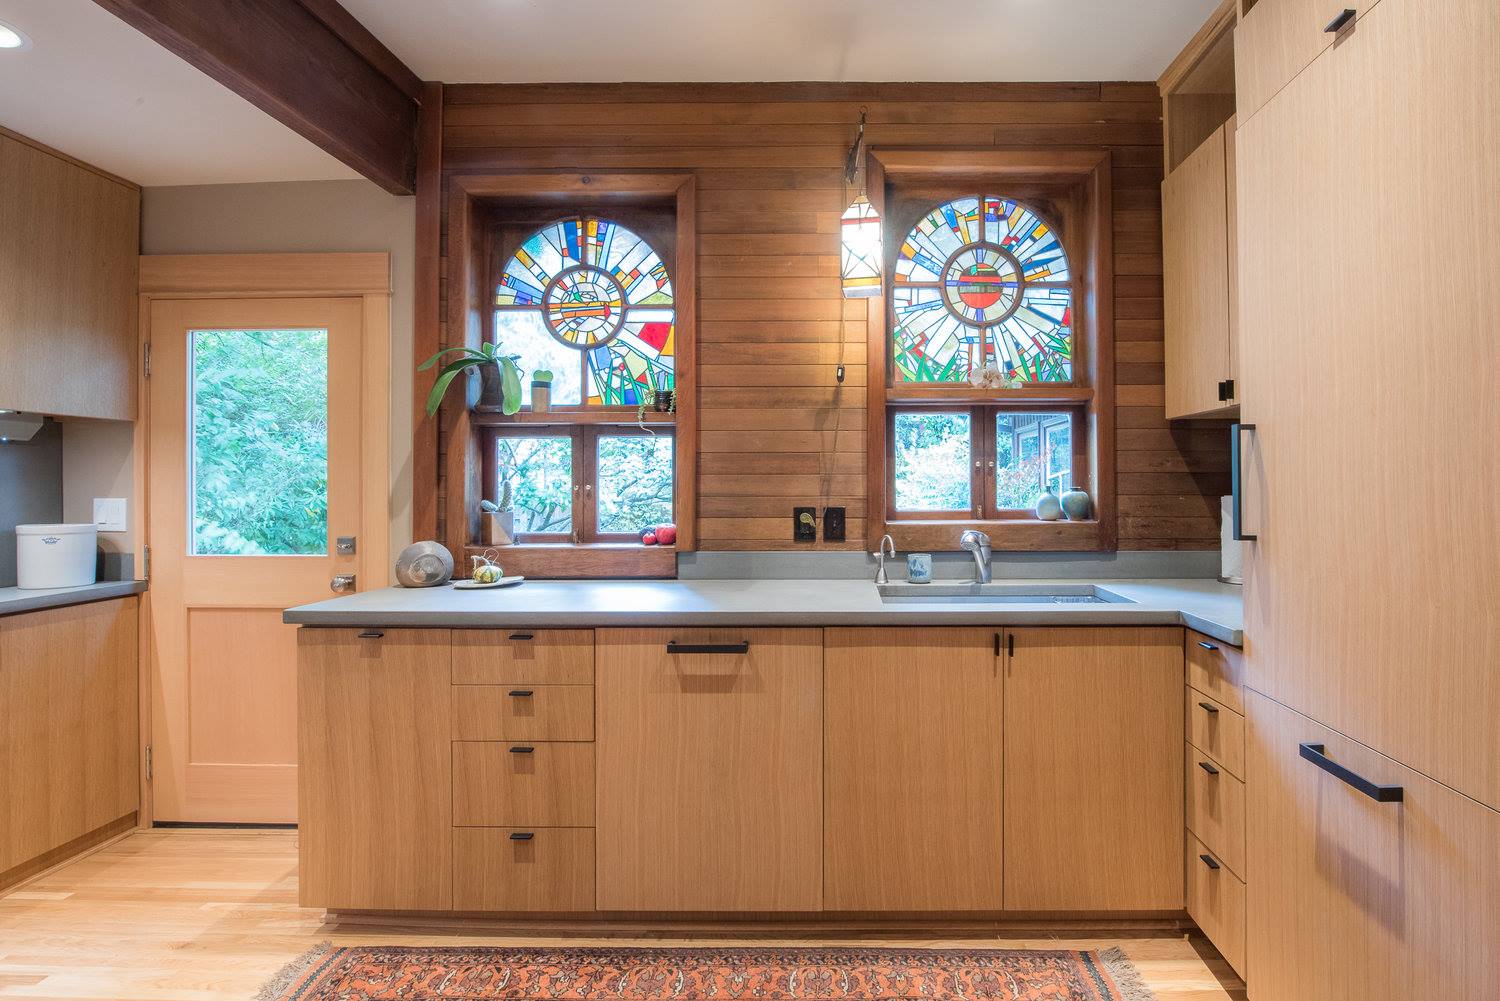 A kitchen with wooden cabinets and a stained glass window.